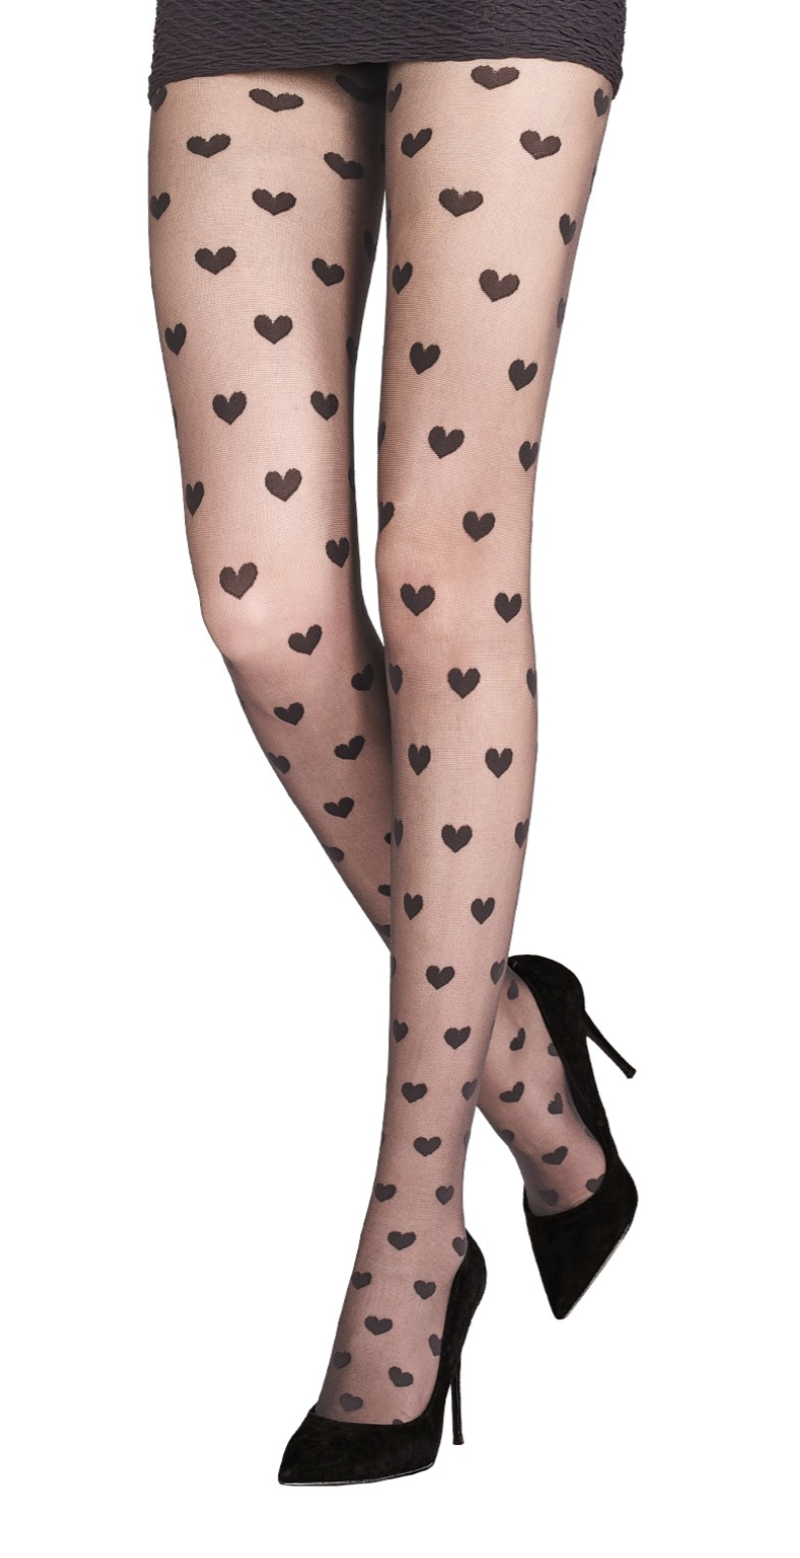 Emilio Cavallini Collant Love - Sheer black fashion tights with a woven all over hearts pattern.